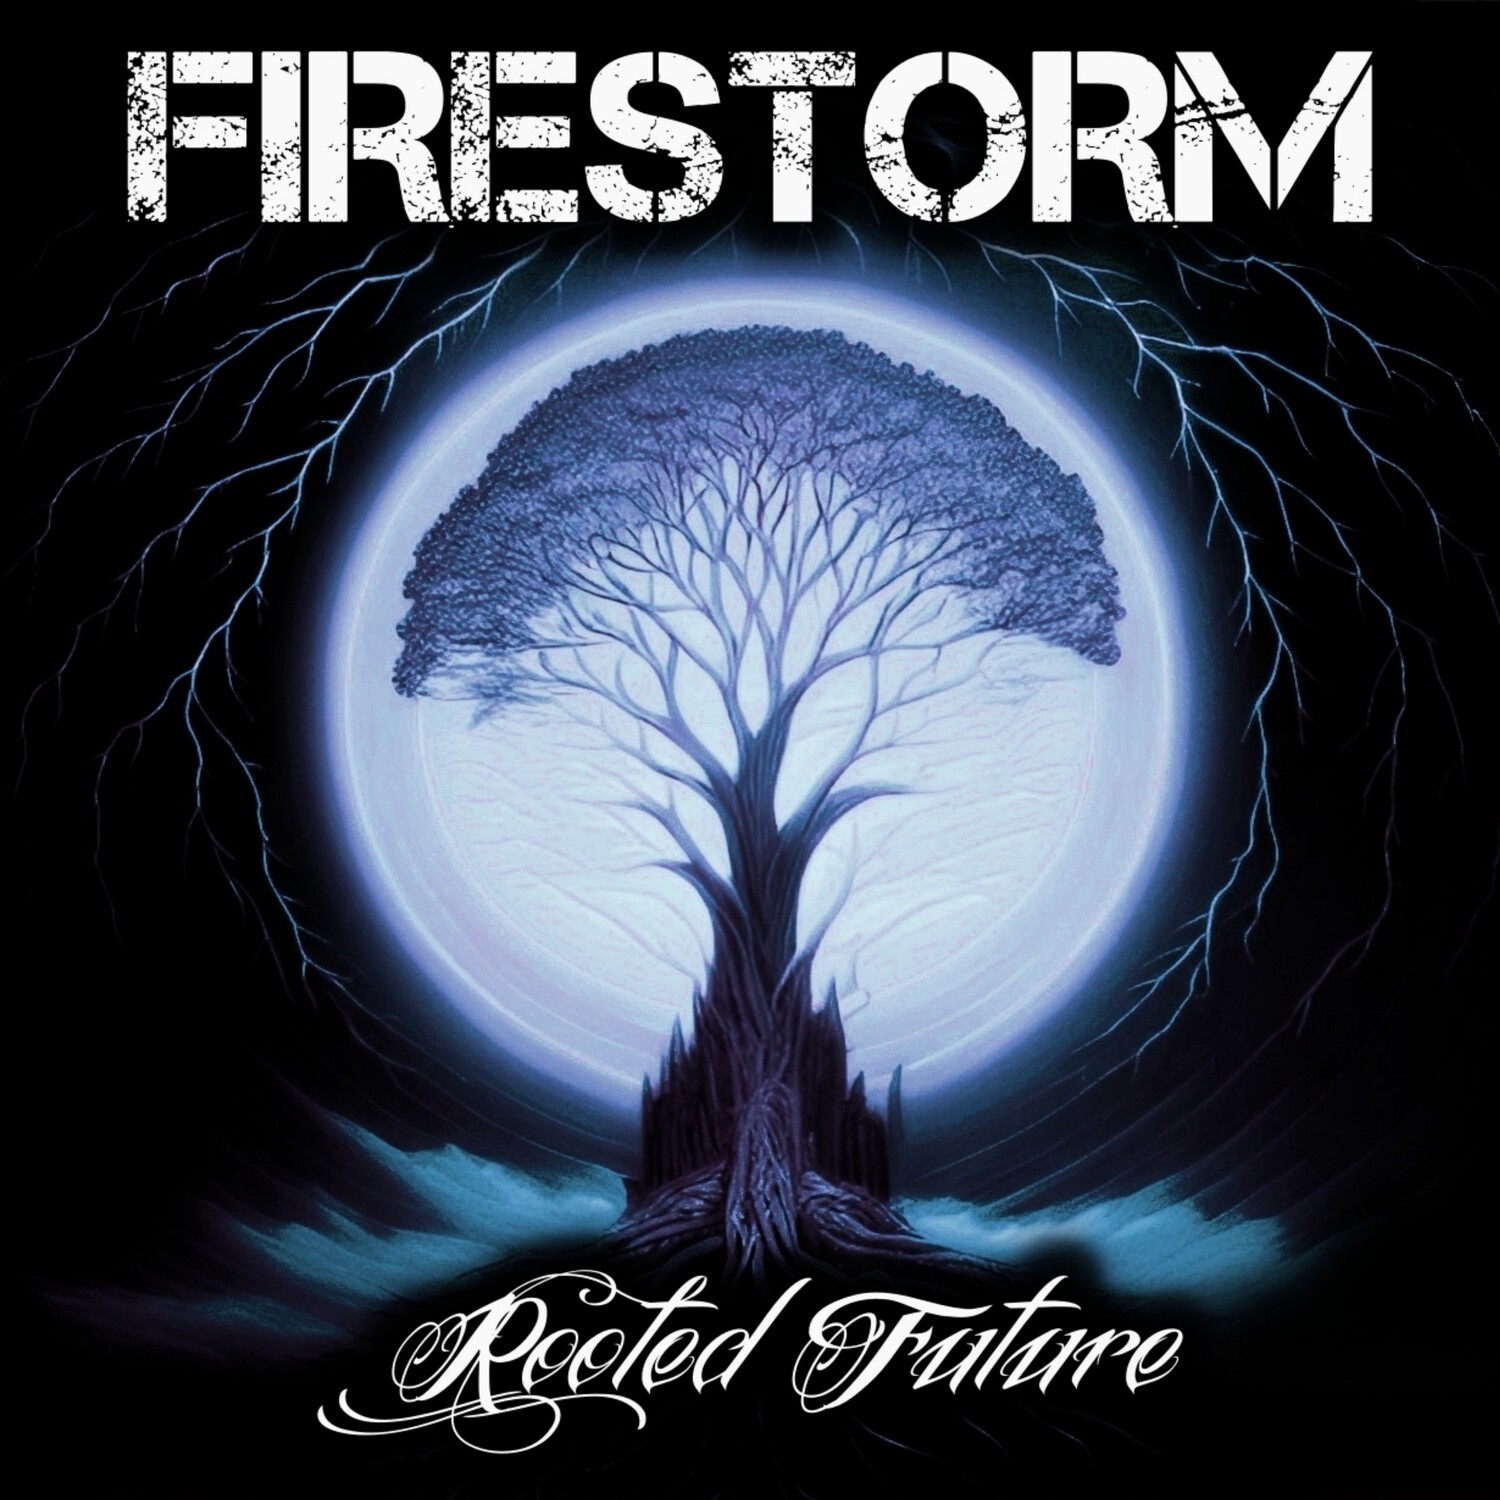 Album "Rooted Future" (CD-Digipack)